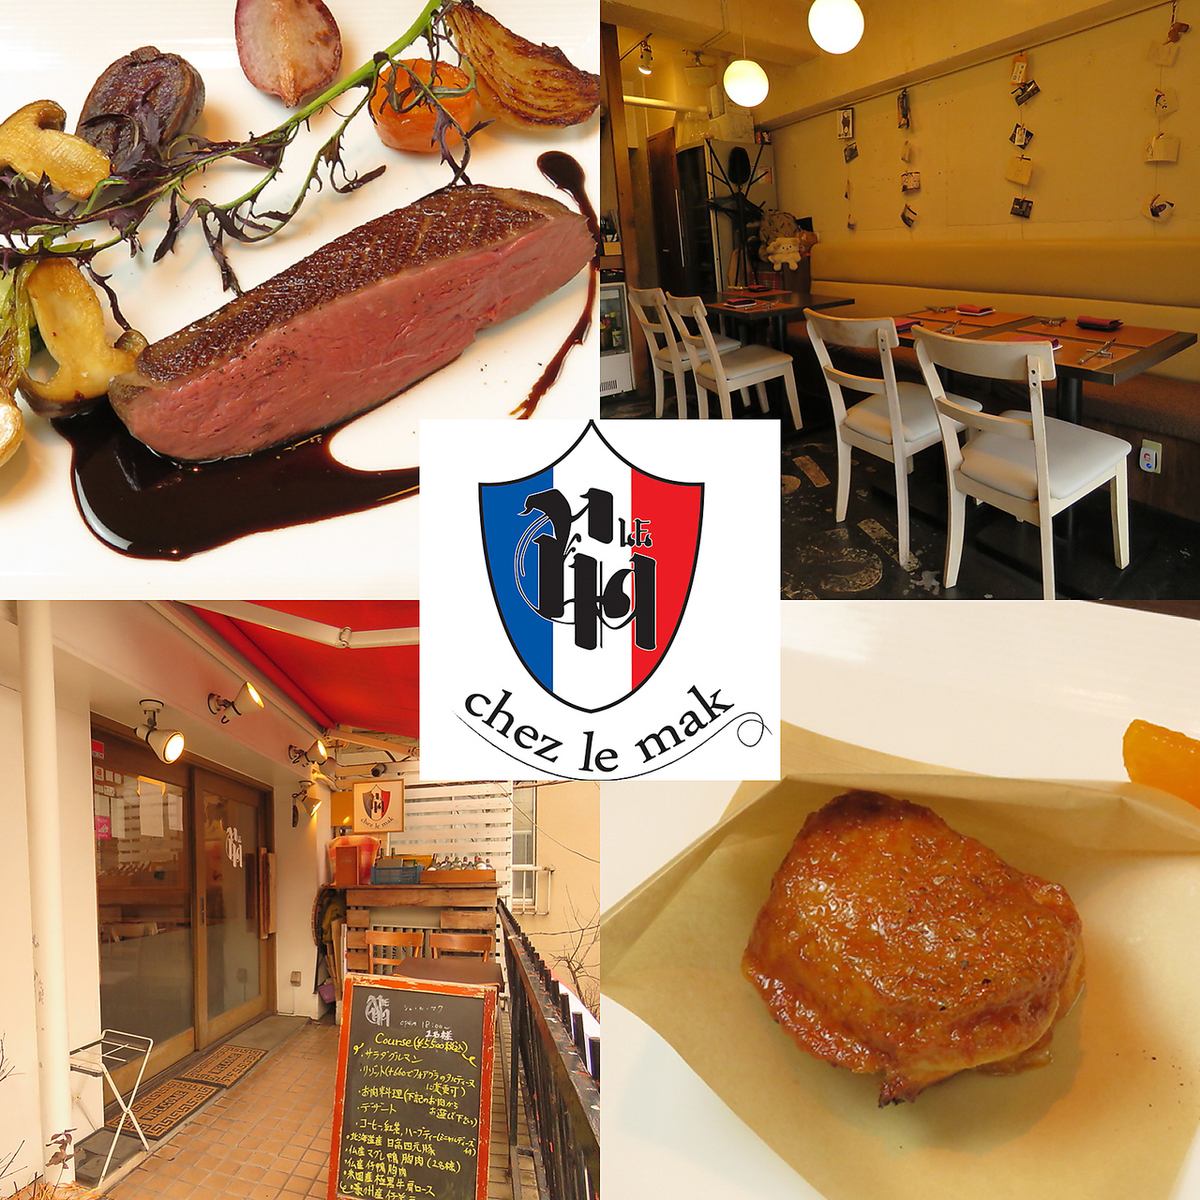 An adult hideaway where you can casually enjoy authentic French cuisine and natural wines from Southern France